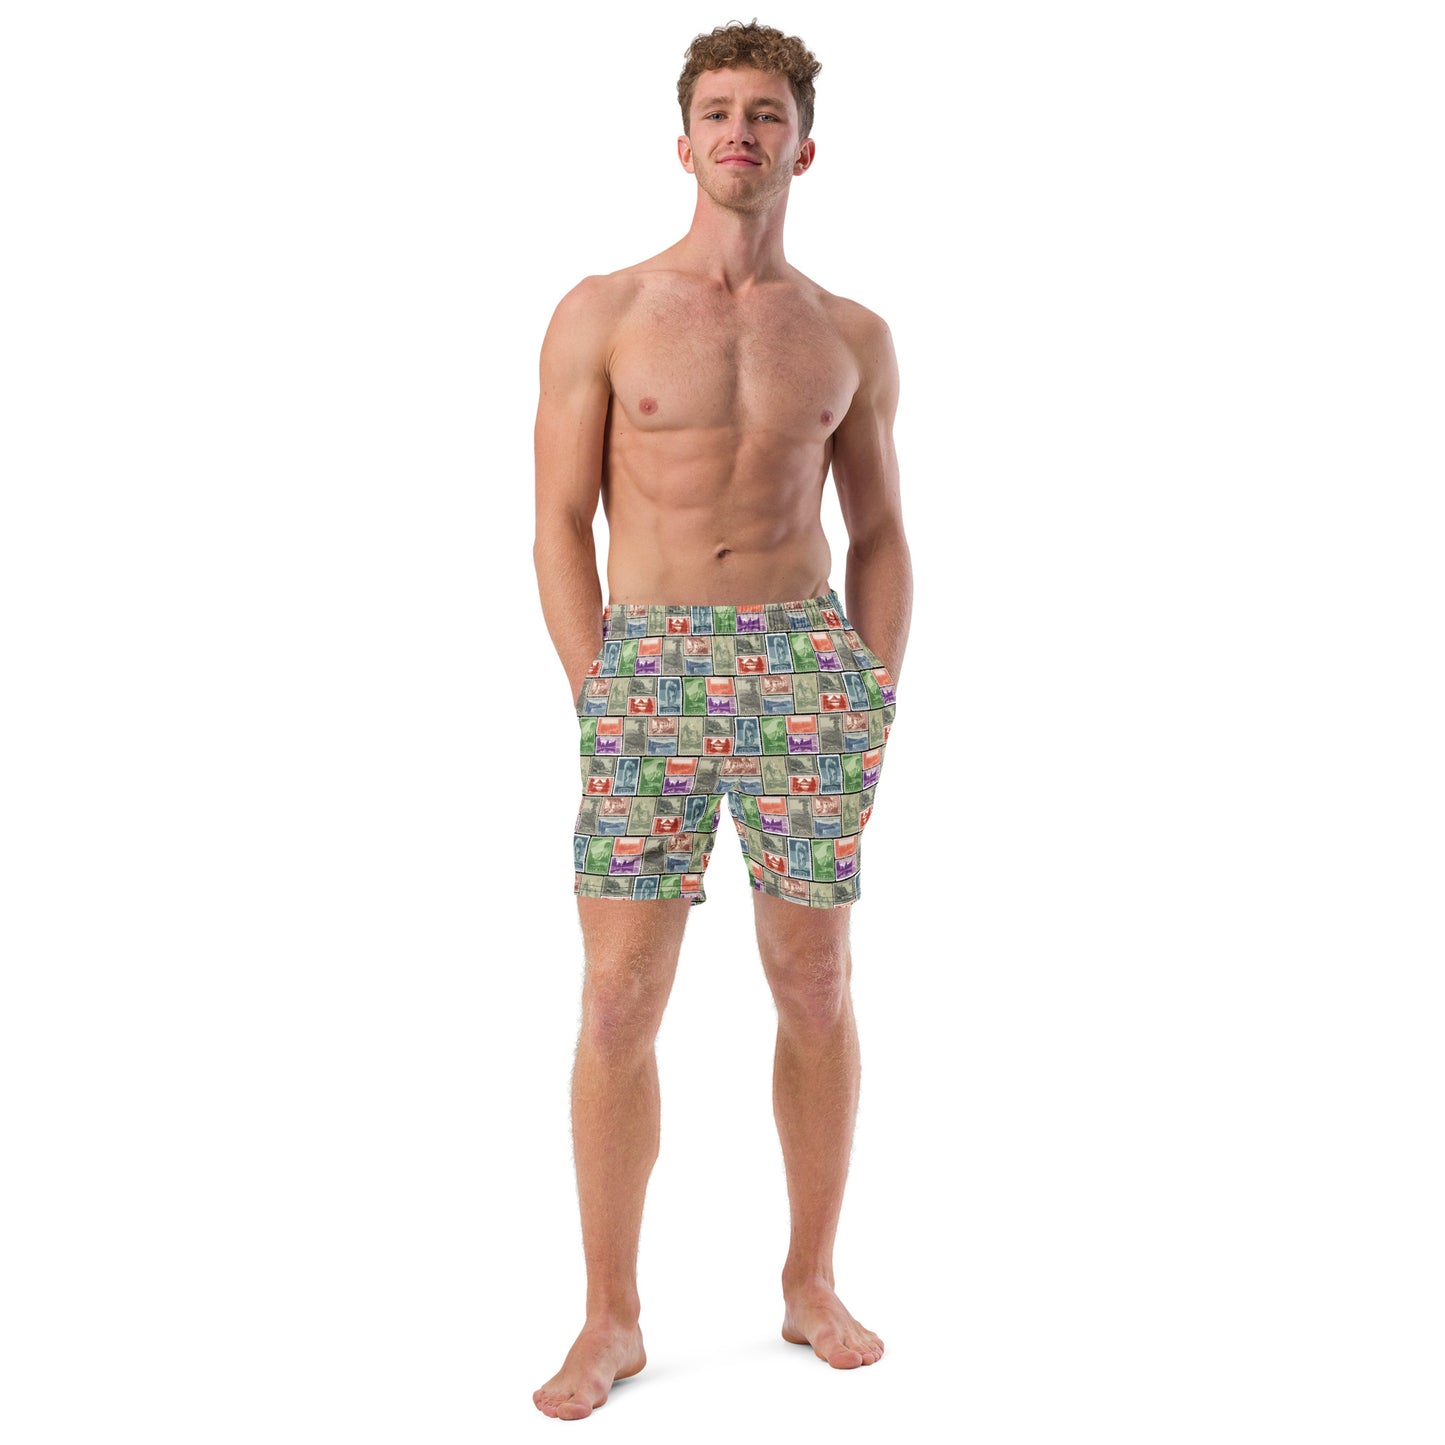 National Park Postage Stamp Recycled Polyester Swim Trunks